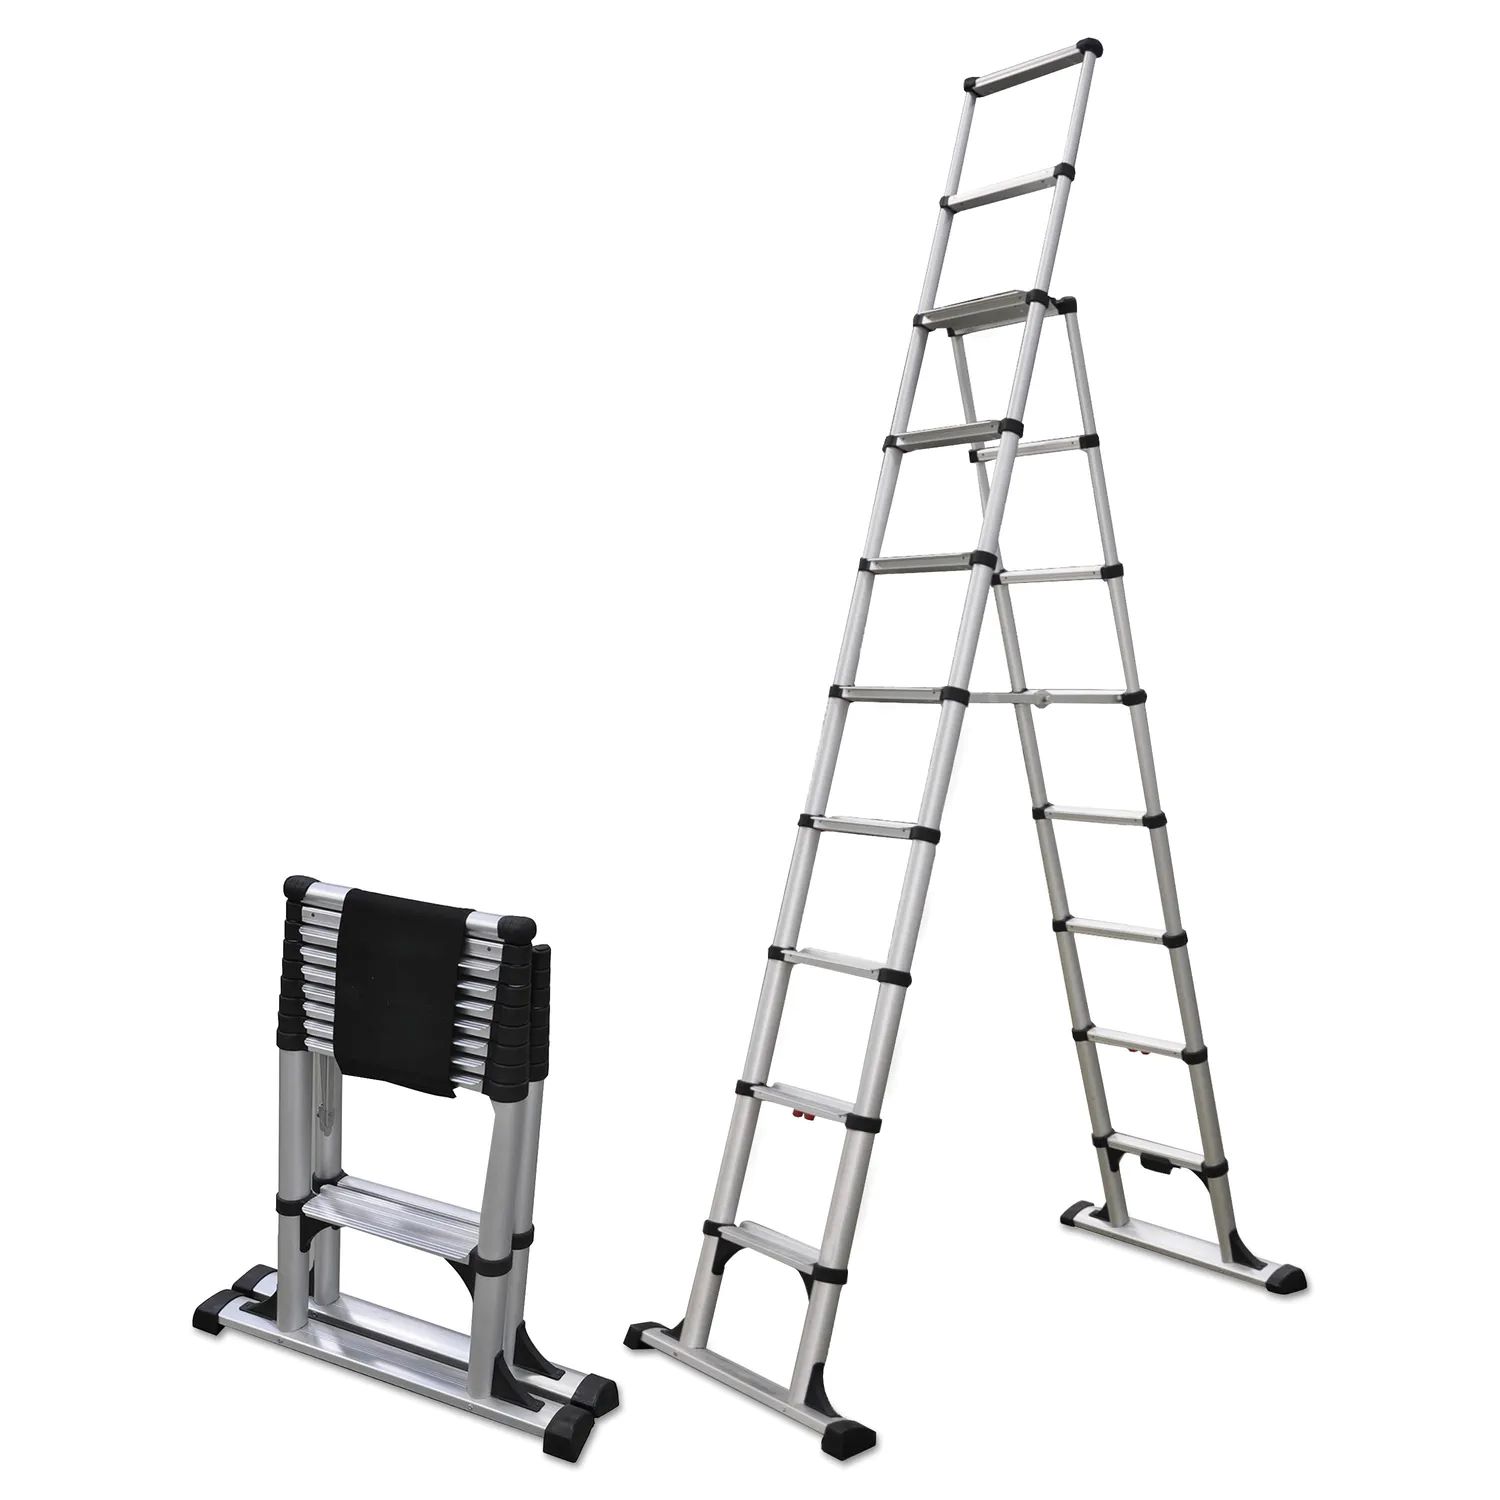 What Is An A-Frame Ladder